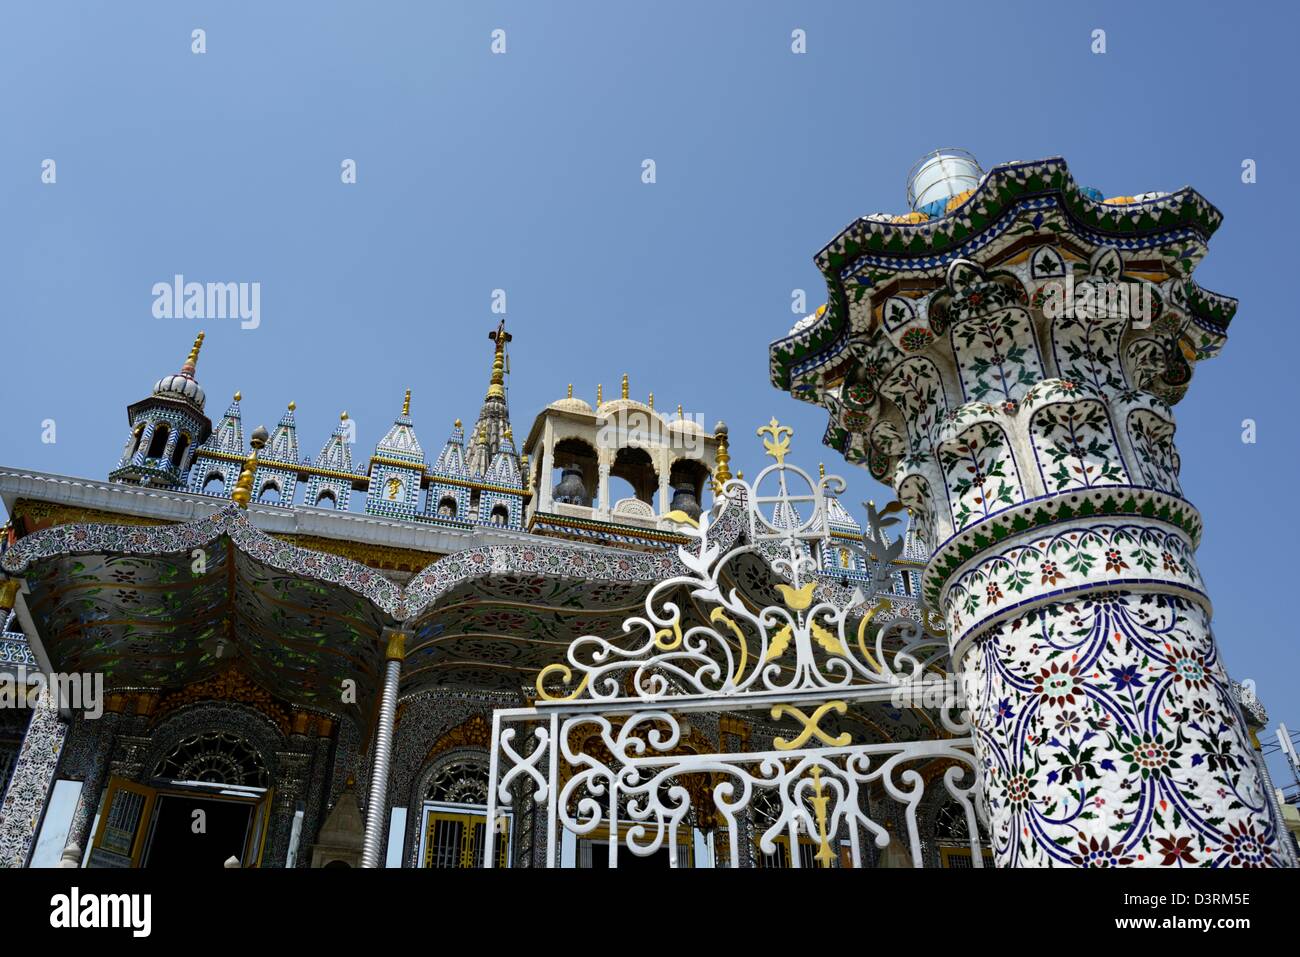 Jain temple1867,covered in mirrors as well mother of pearl detailing, elaborate and striking, Kolkata,India,36MPX,HI-RES Stock Photo